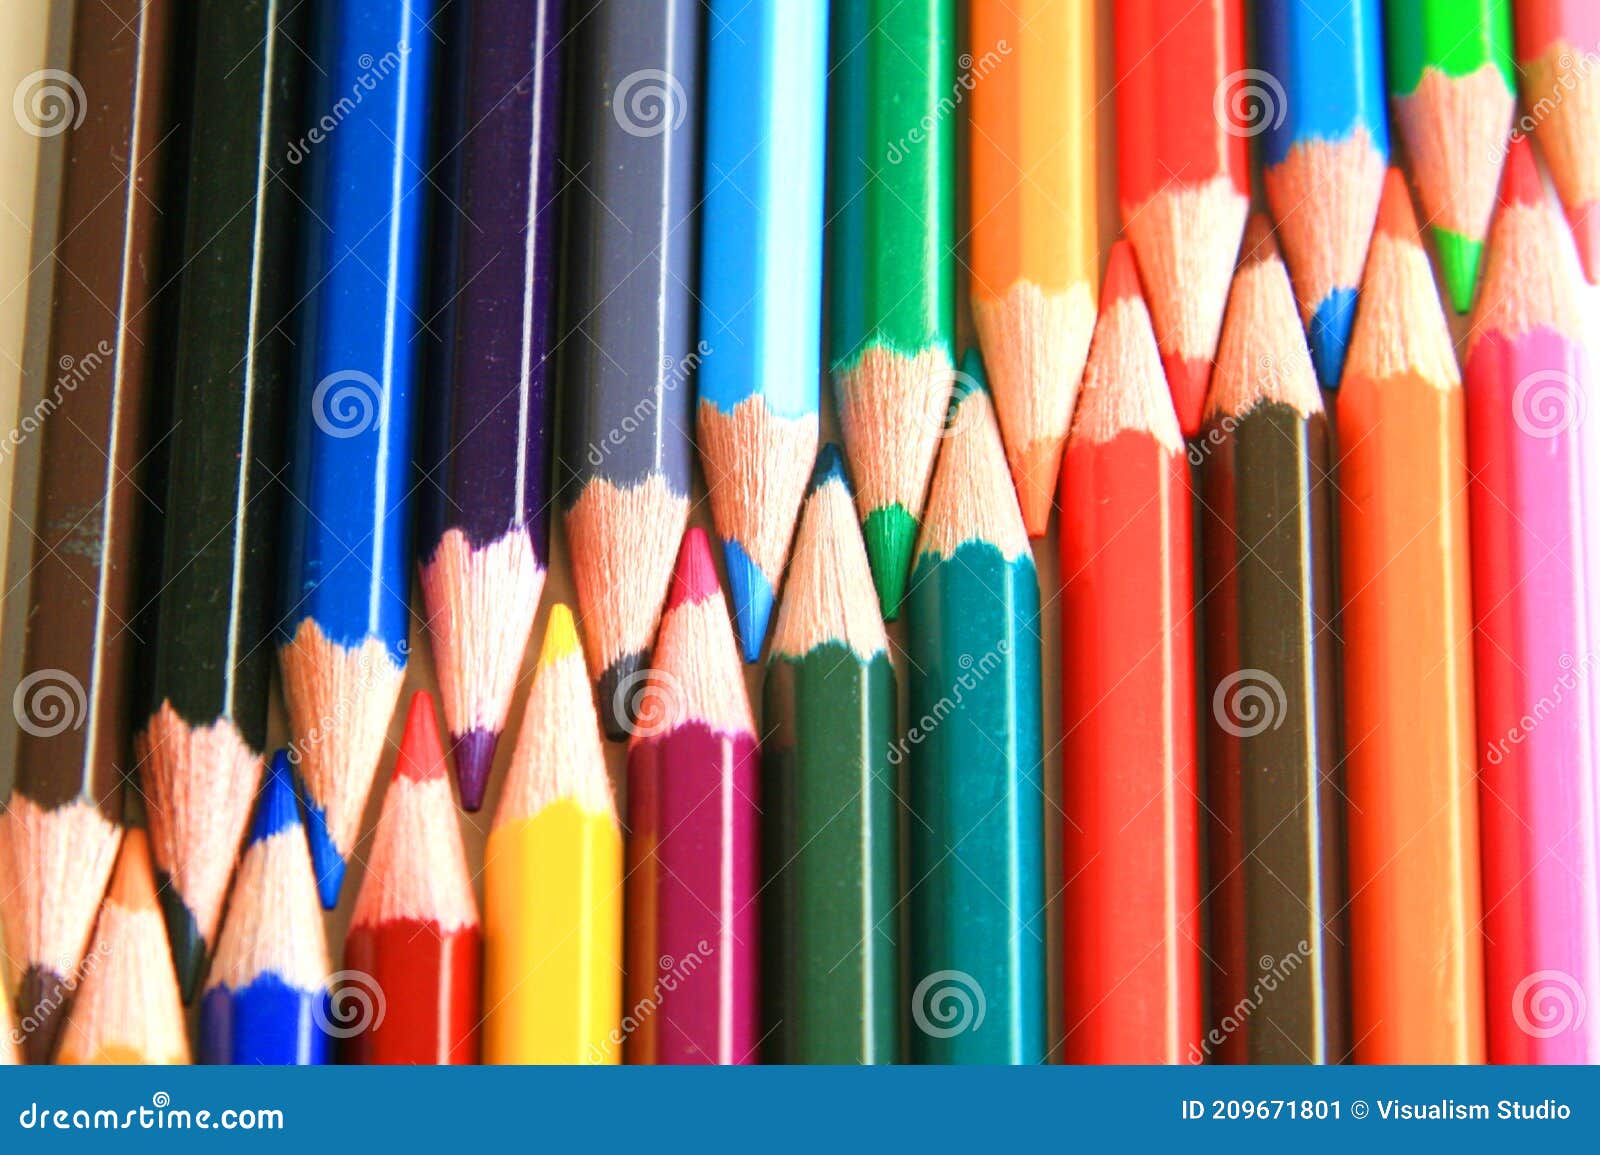 rainbow bunch laying realistic pencils drawing colorful pattern in the white